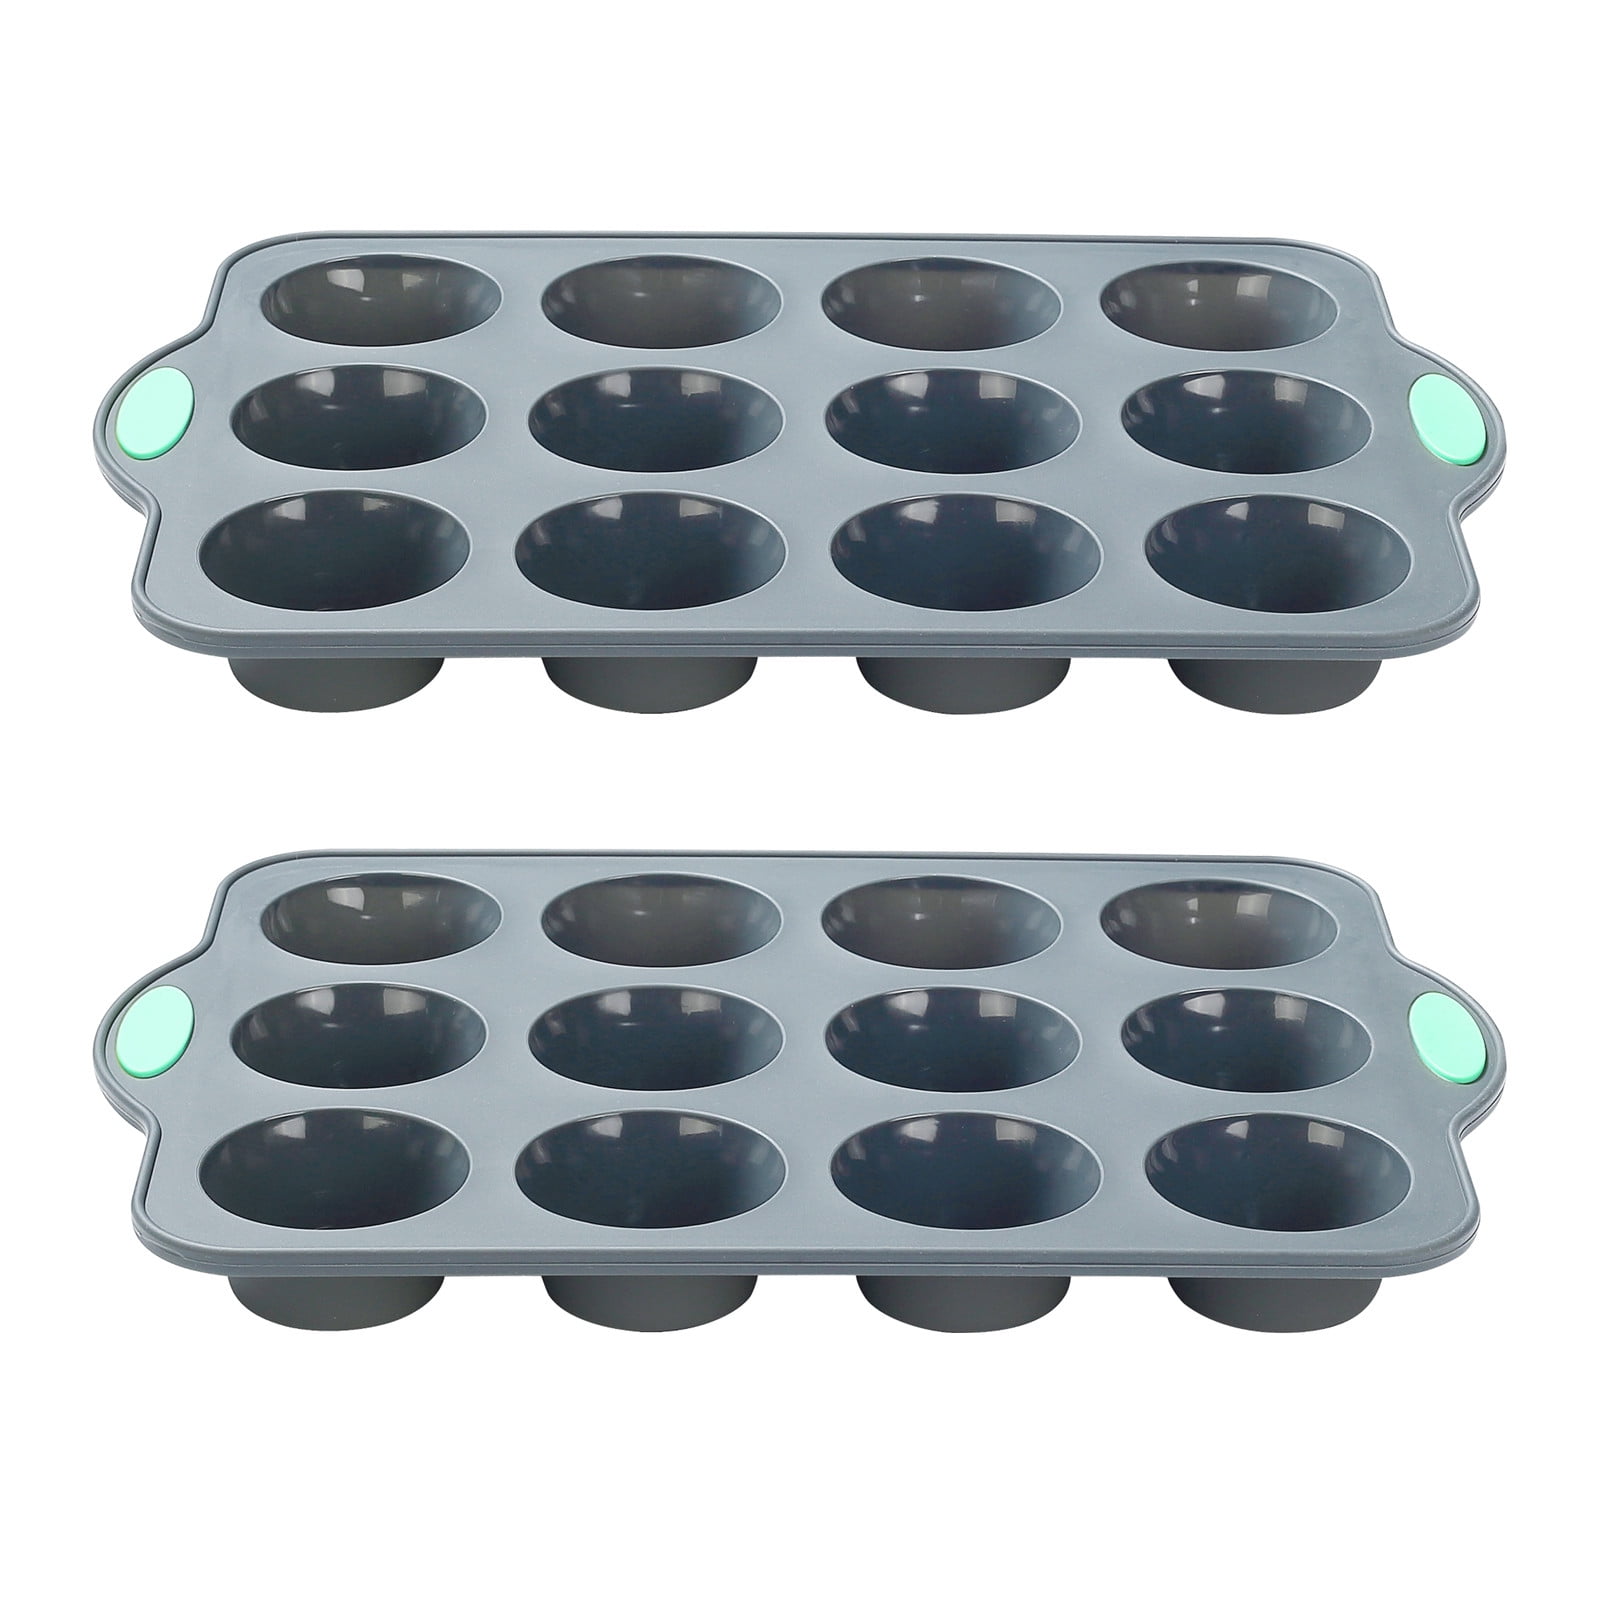 P&P CHEF Muffin Pan Cupcake Baking Pan, 12 Cups Muffin Tin Tray, Stainless  Steel Muffin Top Pans for Baking Cake Muffin Tart Quiche, Oven & Dishwasher